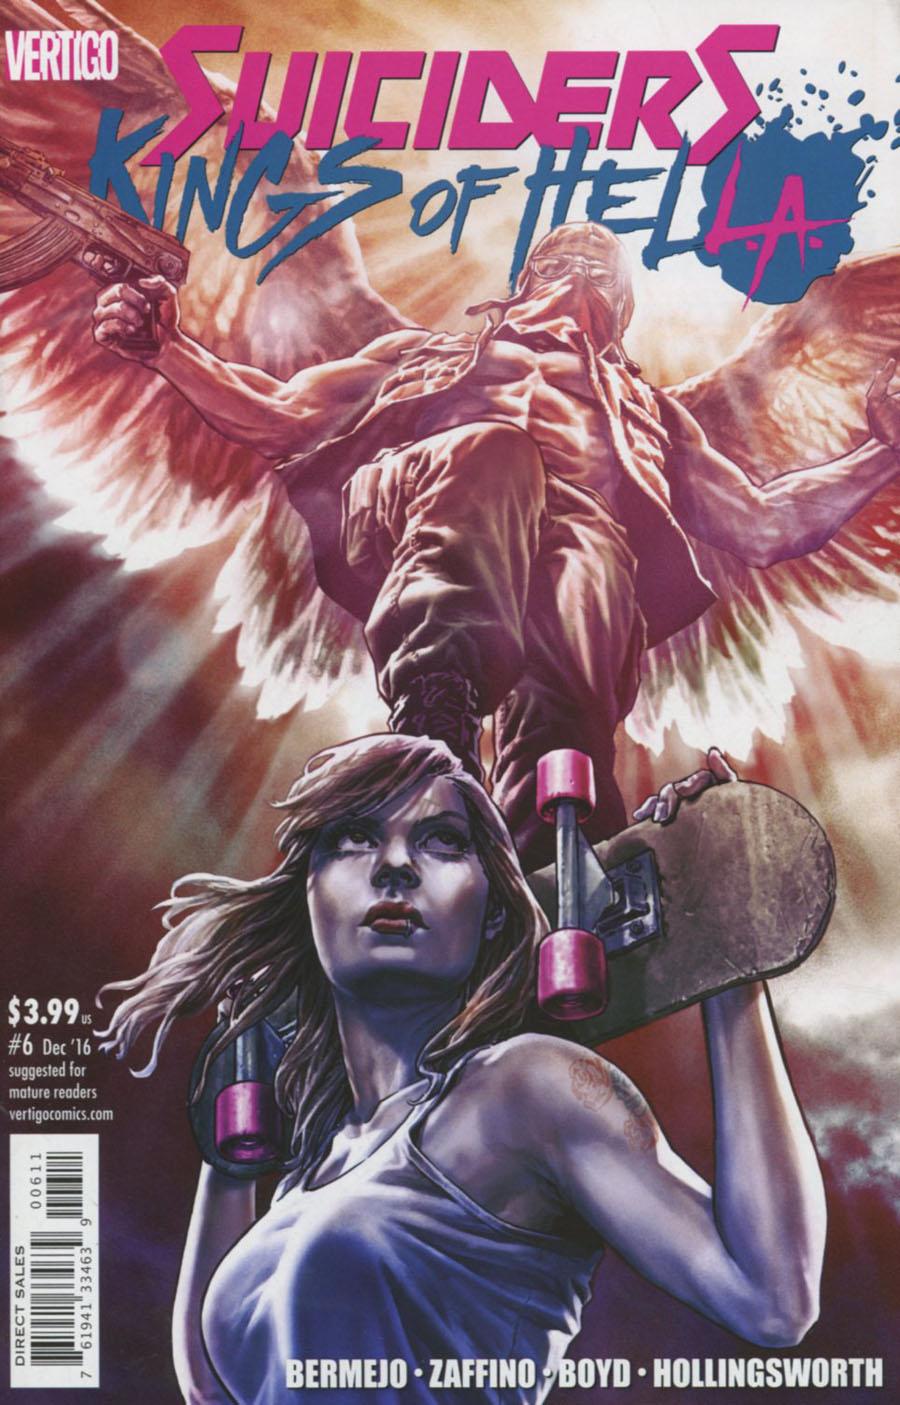 Suiciders Kings Of HelL.A. Vol. 1 #6